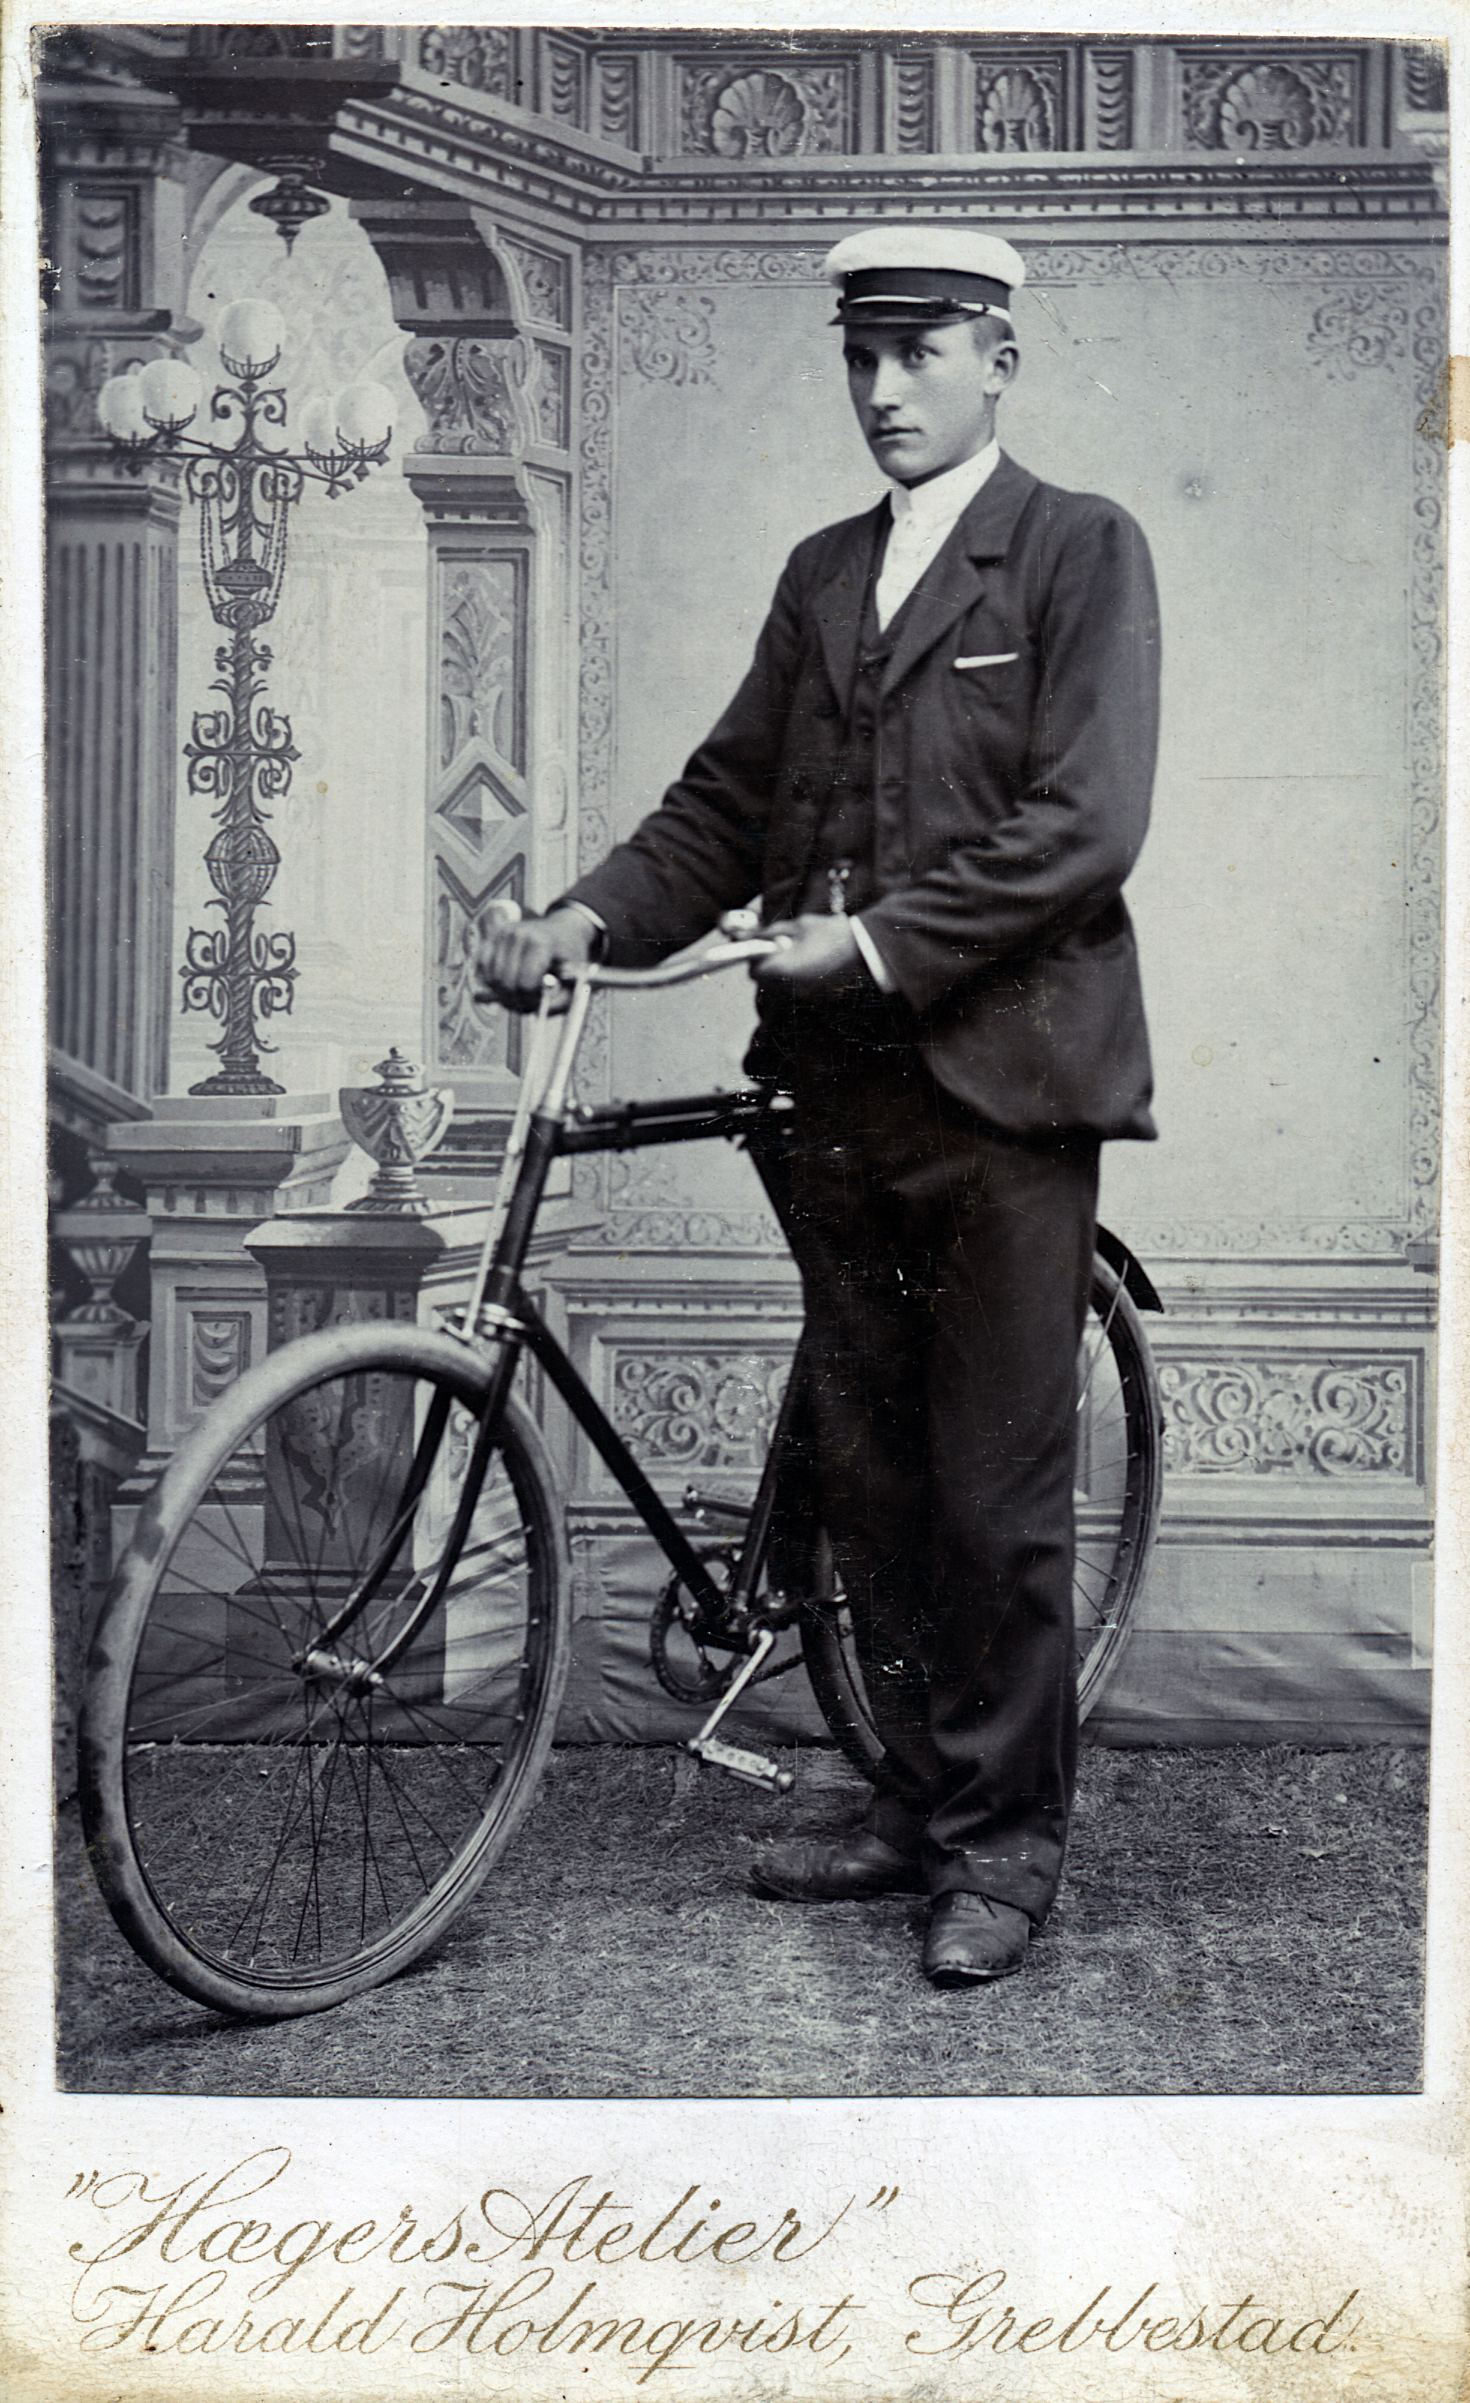 He is wearing a suit and a janty cap, and holding 
        pedal bicycle with pneumatic tires.